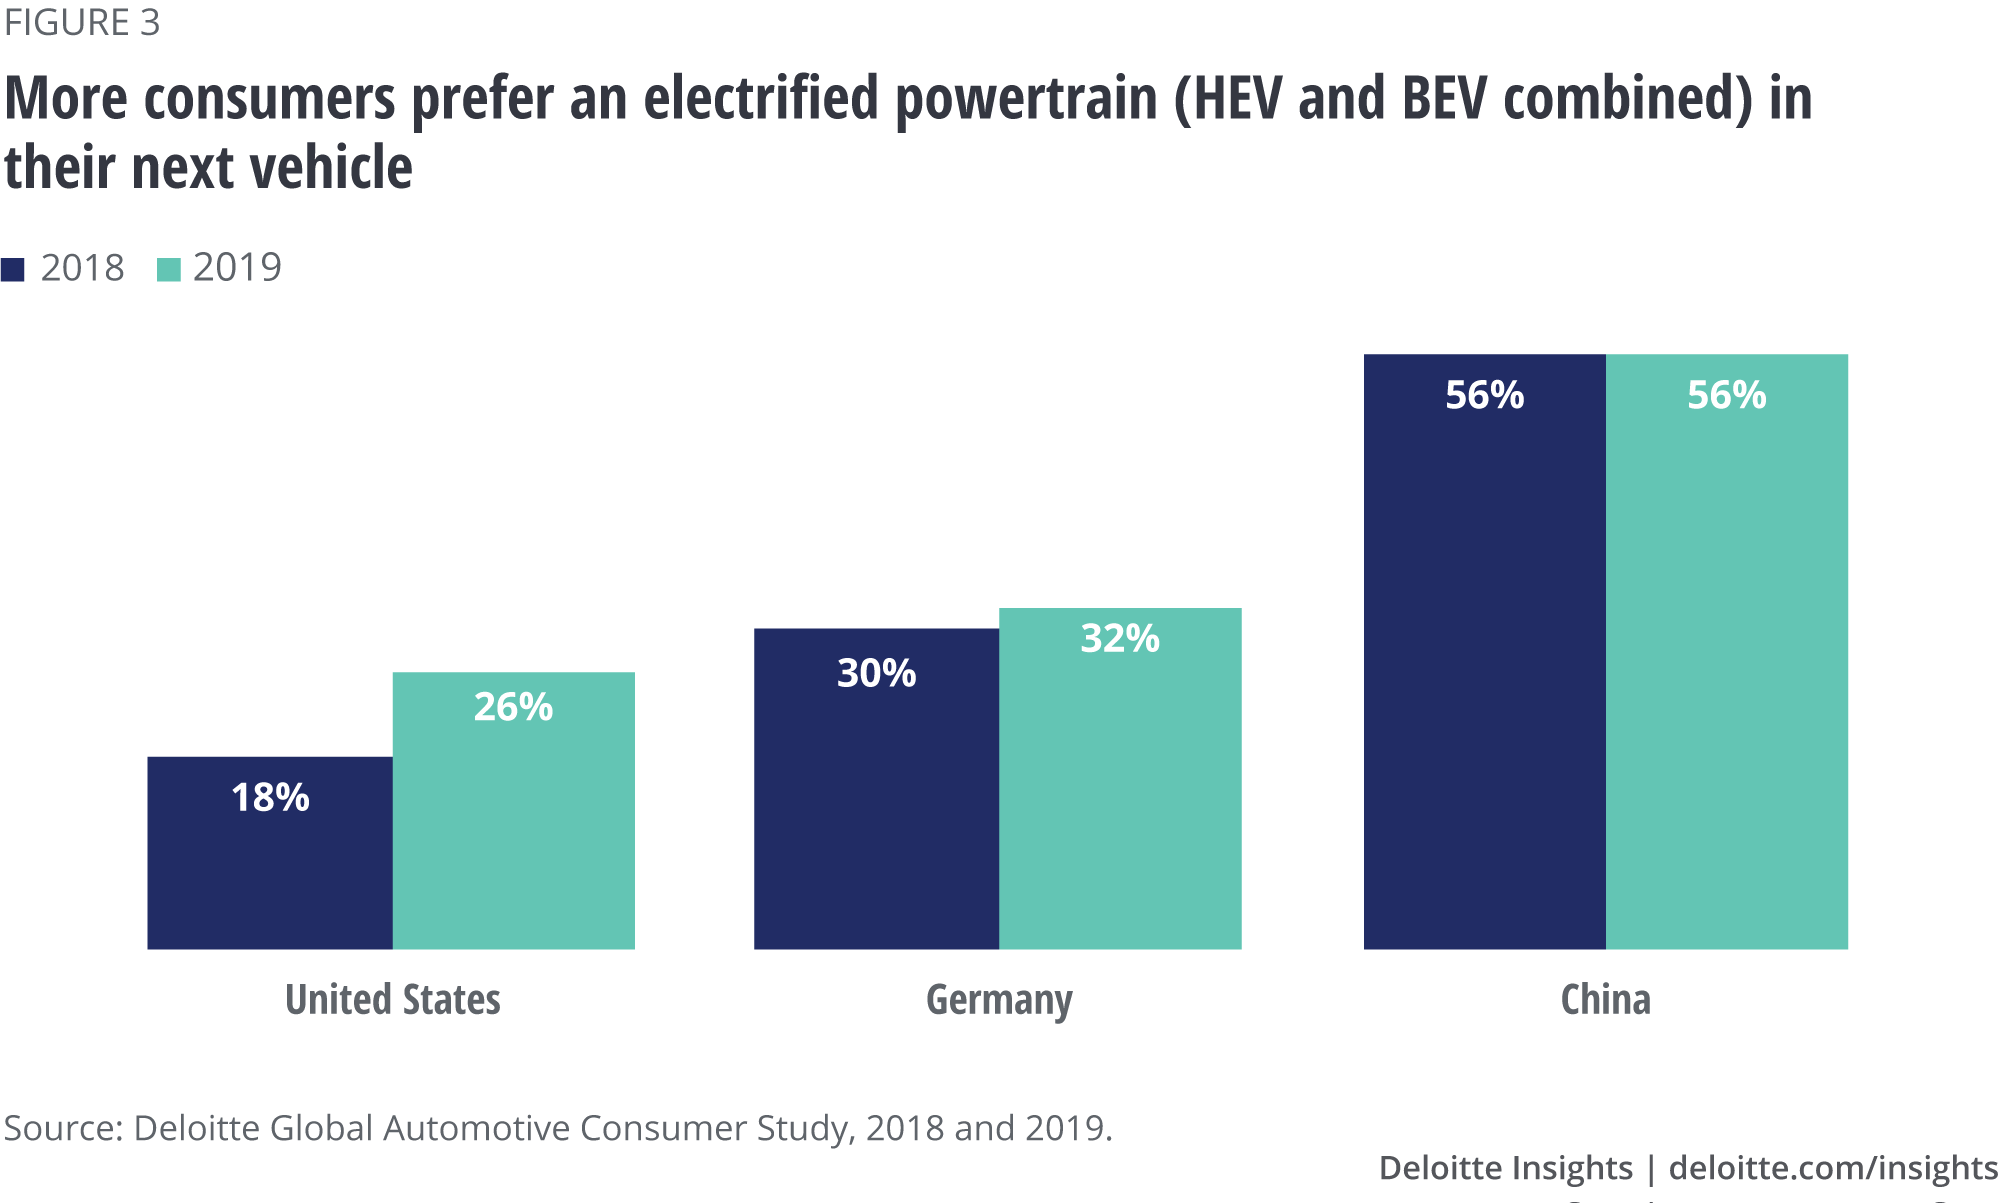 More consumers prefer an electrified powertrain (HEV and BEV combined) in their next vehicle